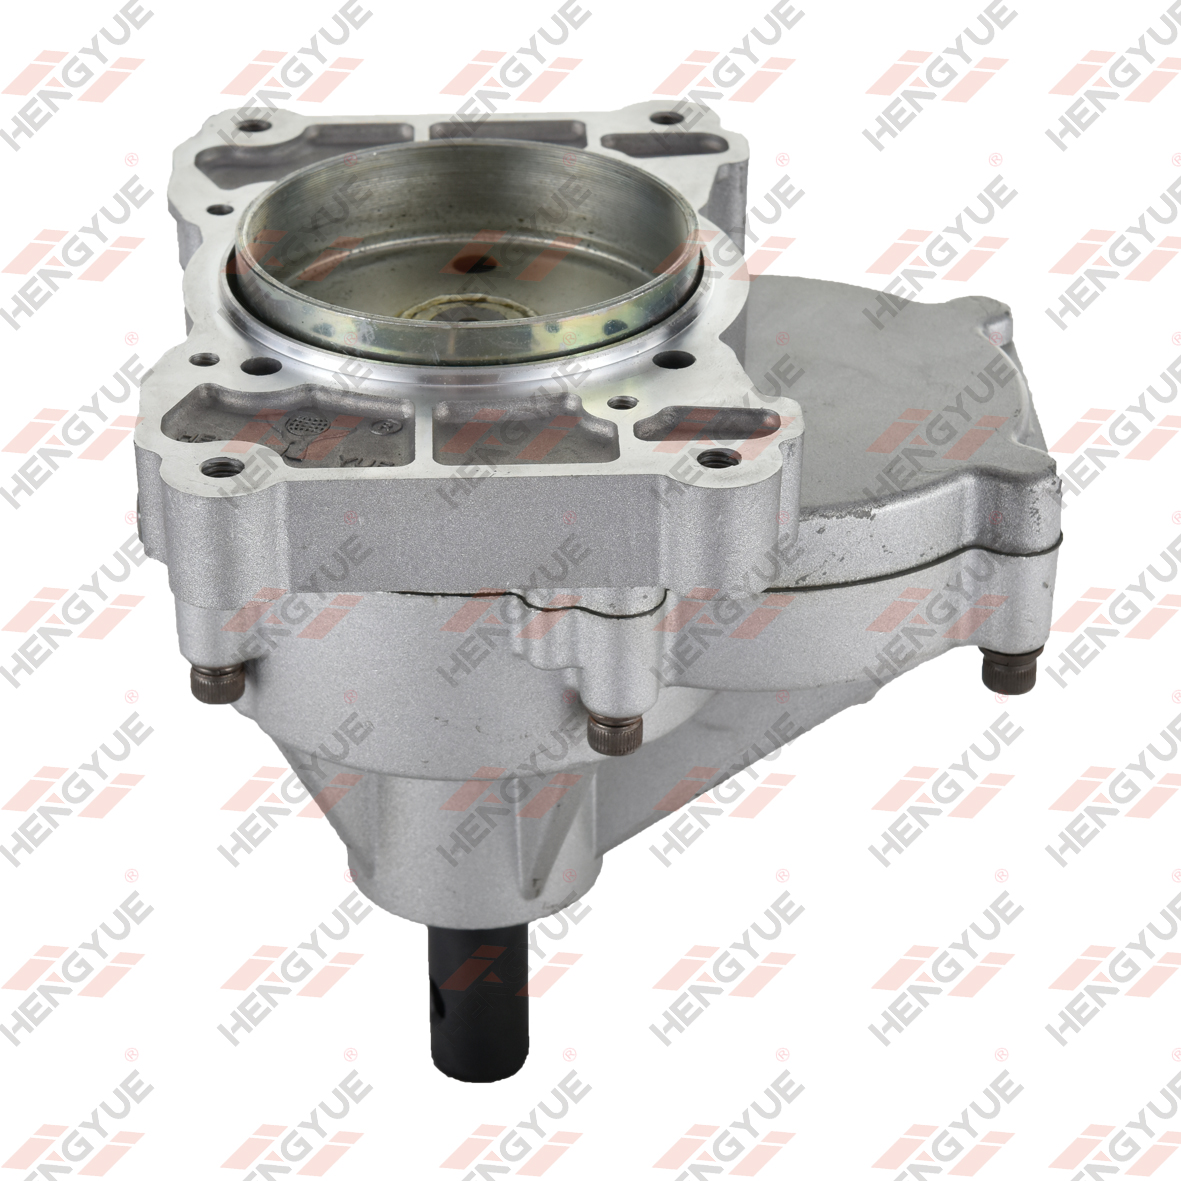 Gear box for small 4 or 2 Stroke gasoline engine power earth auger machine 